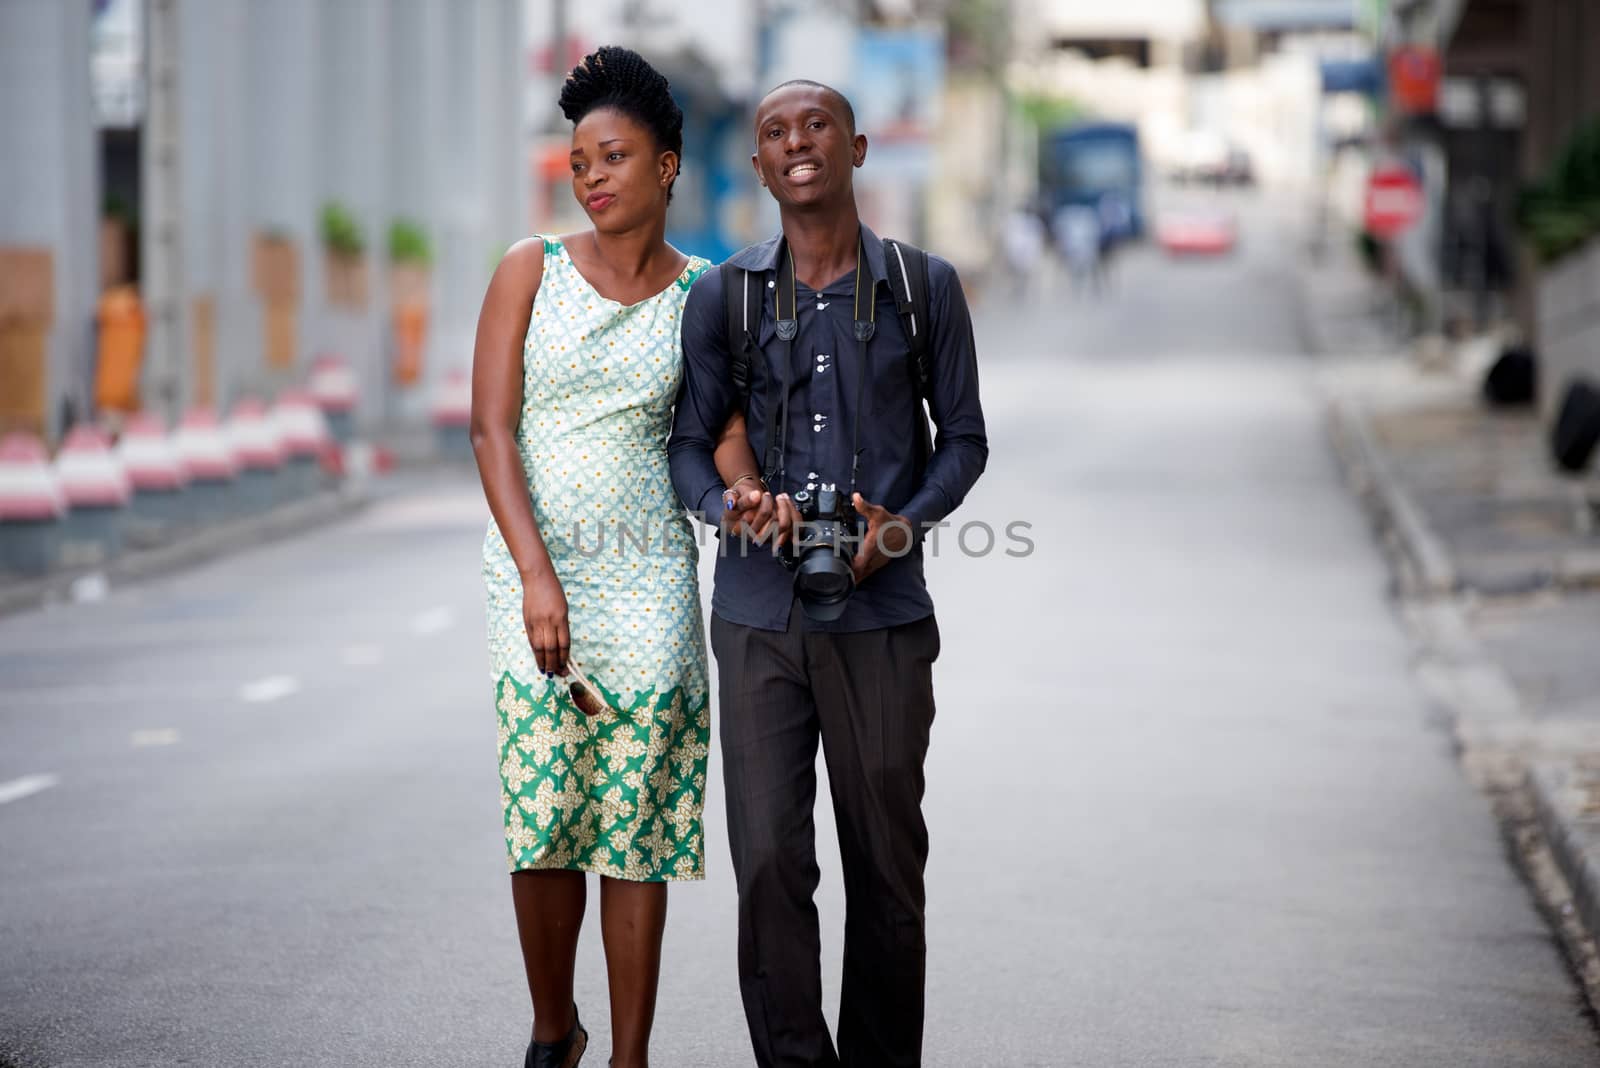 tourist couple walking in the city and observing cultural place to take a picture